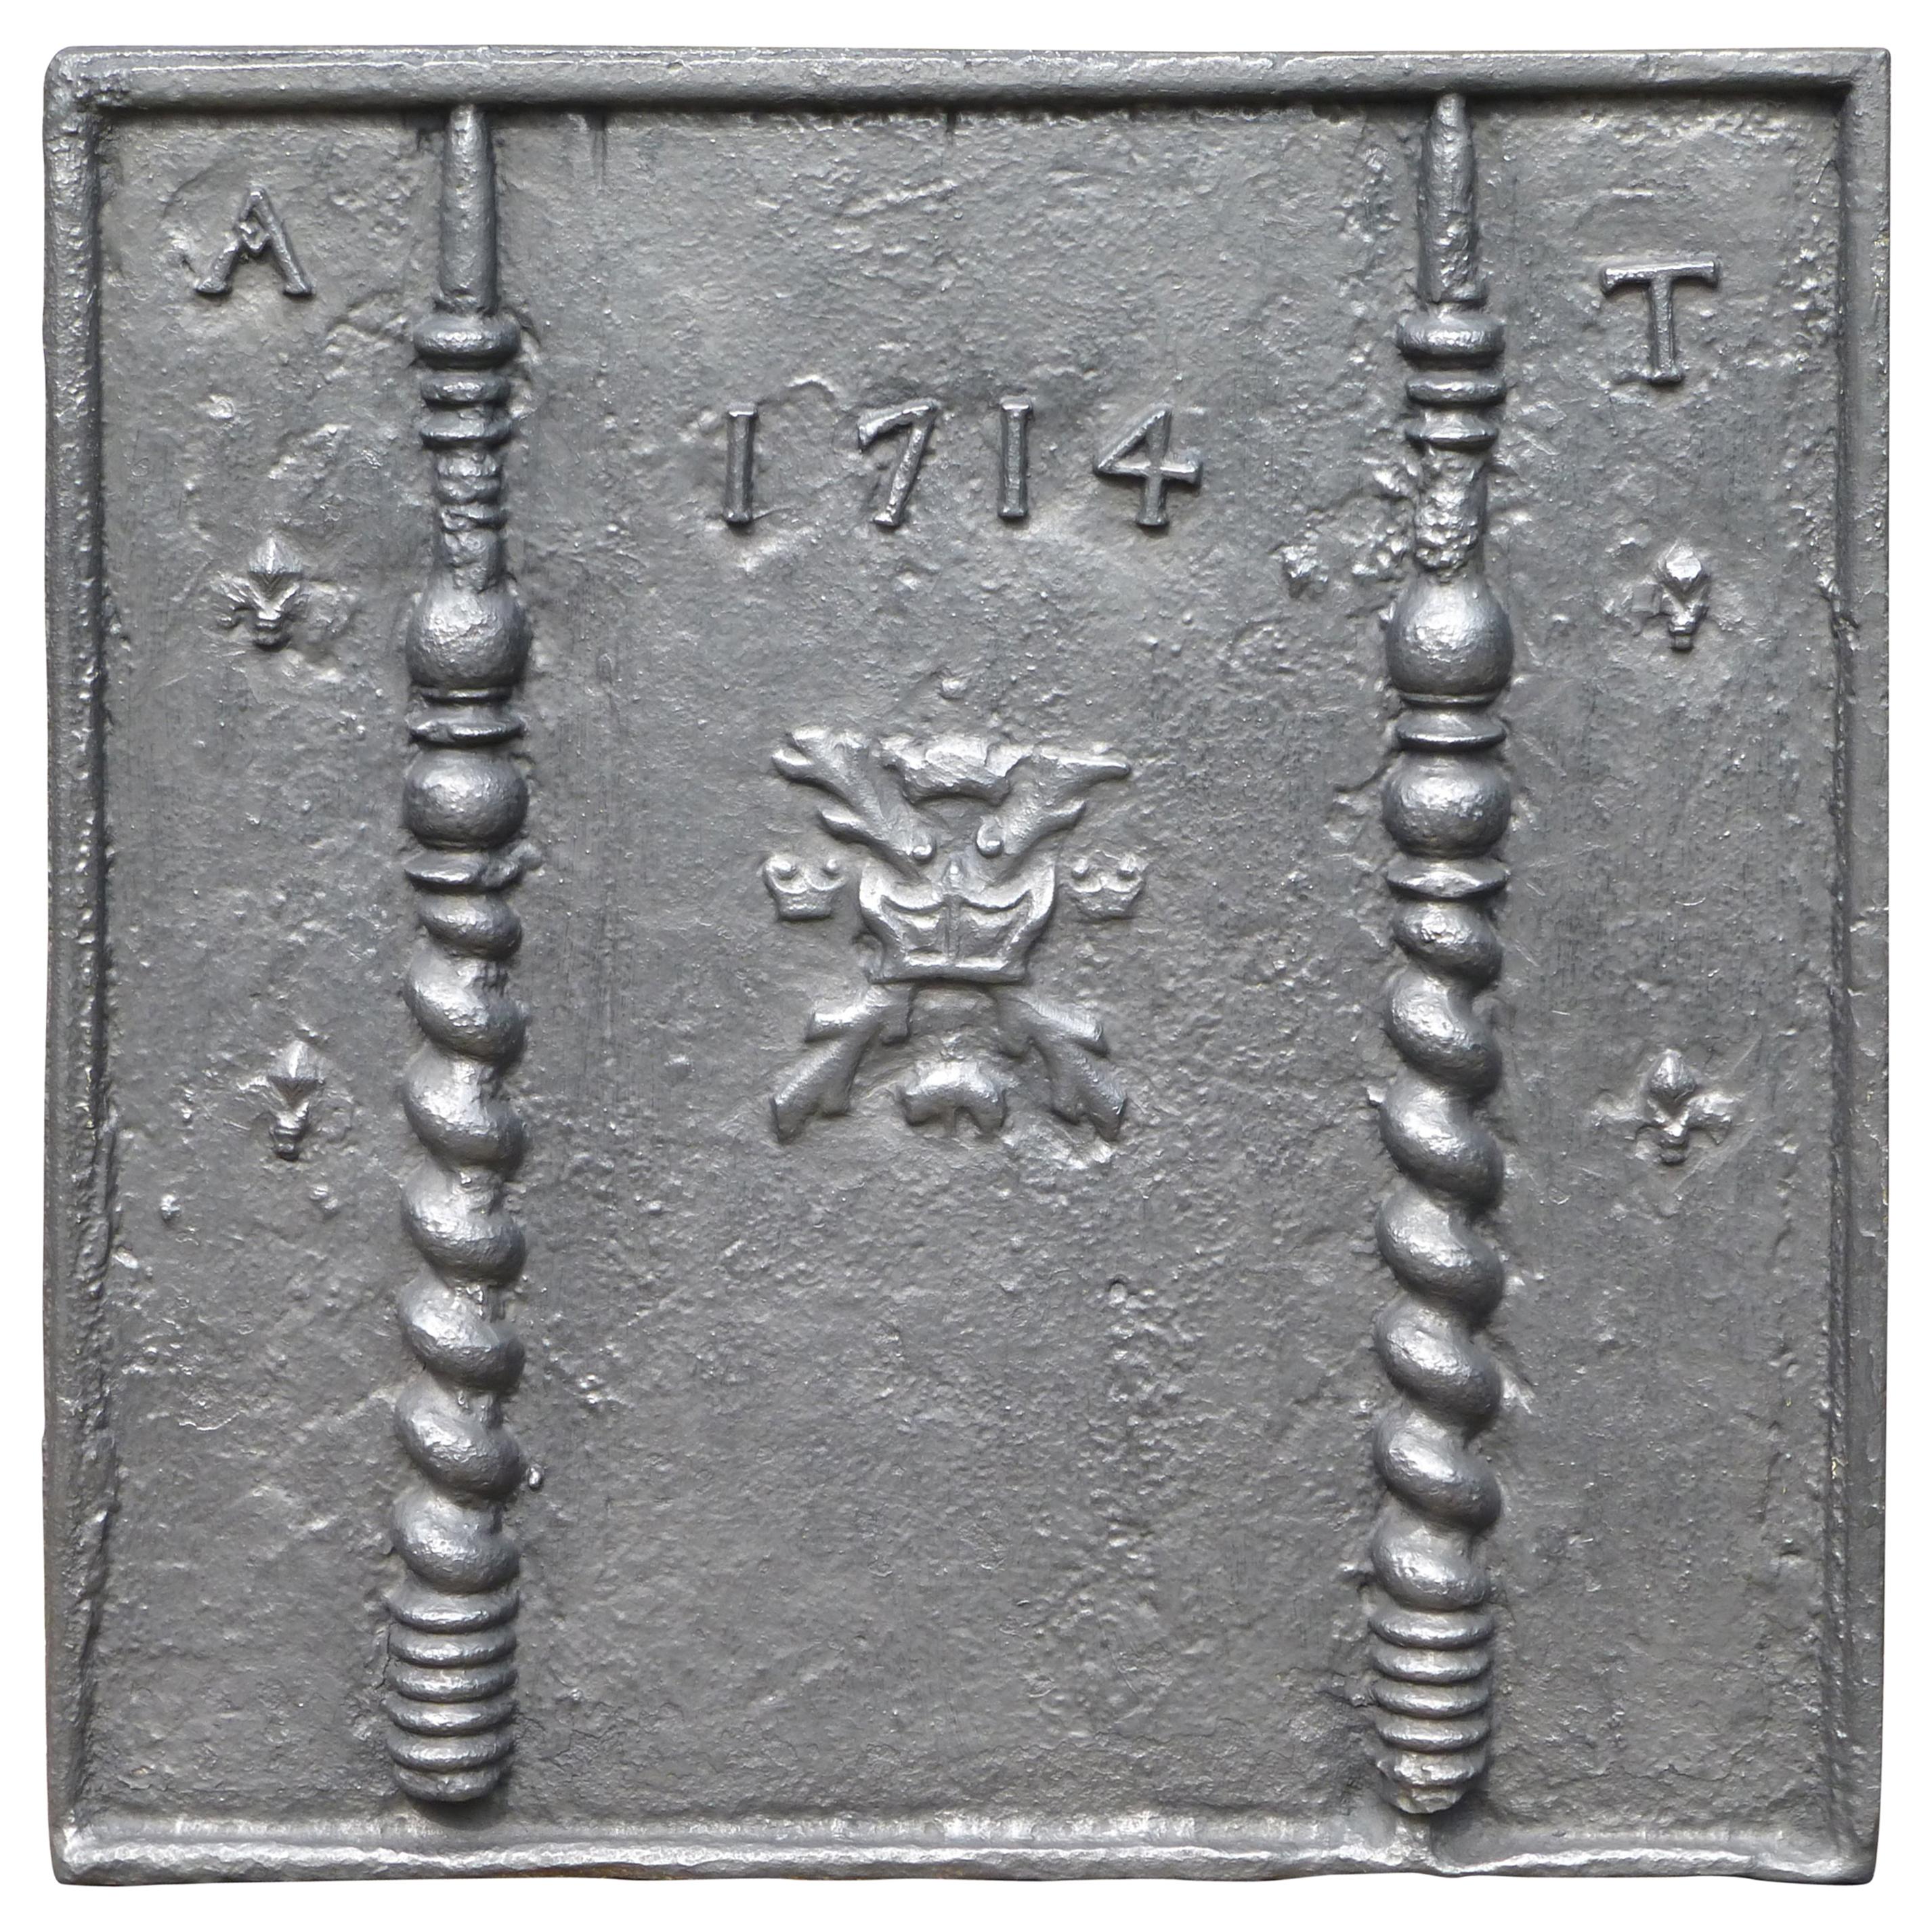 Antique Fireback / Backsplash with the Coat of Arms of Burgundy, Dated 1714